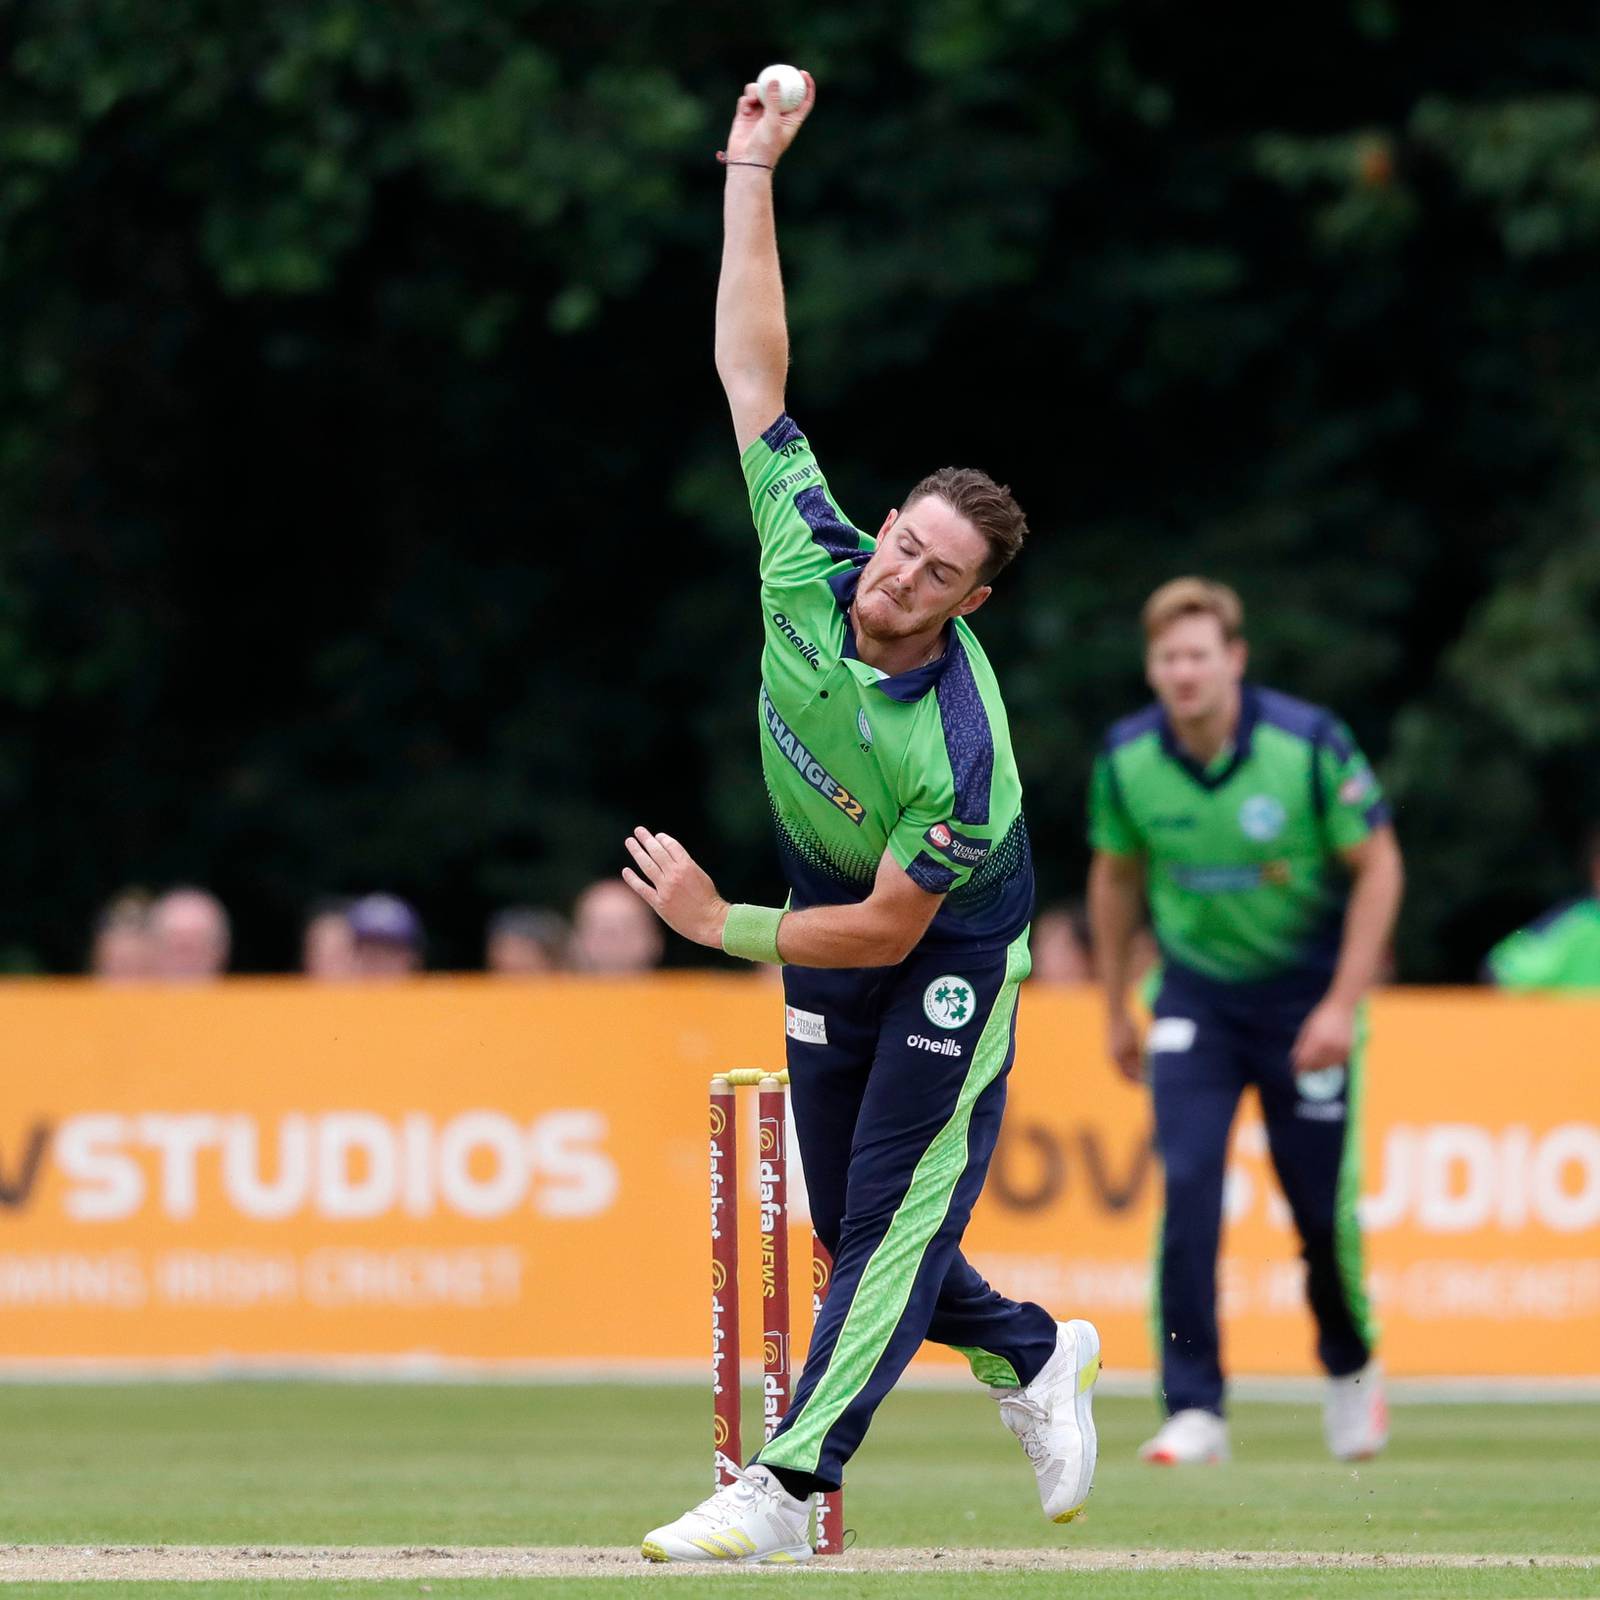 Ireland's Cricket World Cup hopes hang by a thread following last